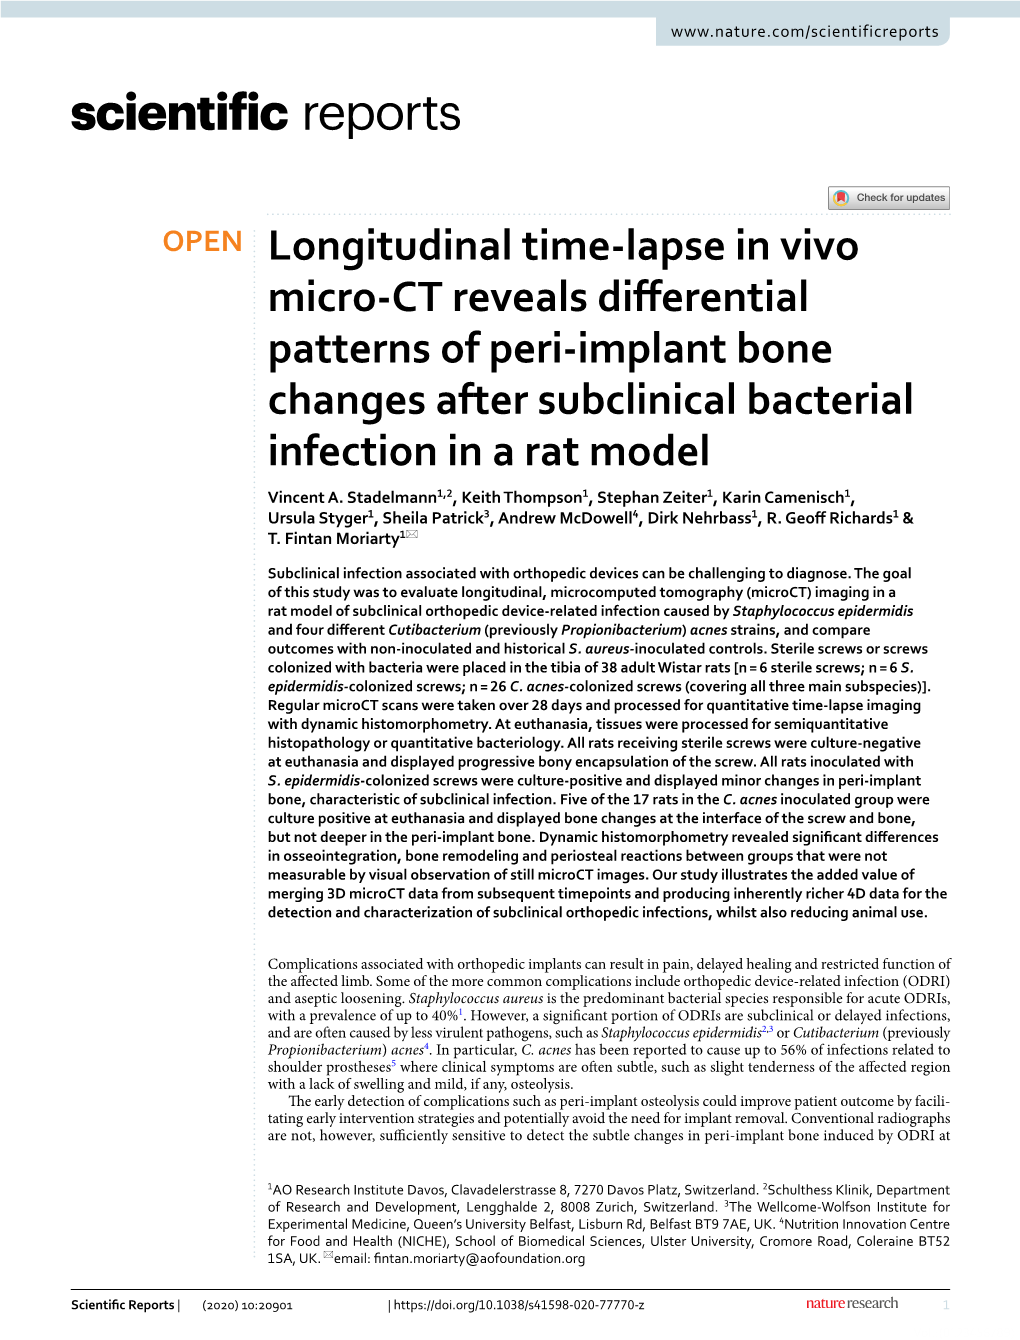 Longitudinal Time-Lapse in Vivo Micro-CT Reveals Differential Patterns of Peri-Implant Bone Changes After Subclinical Bacterial